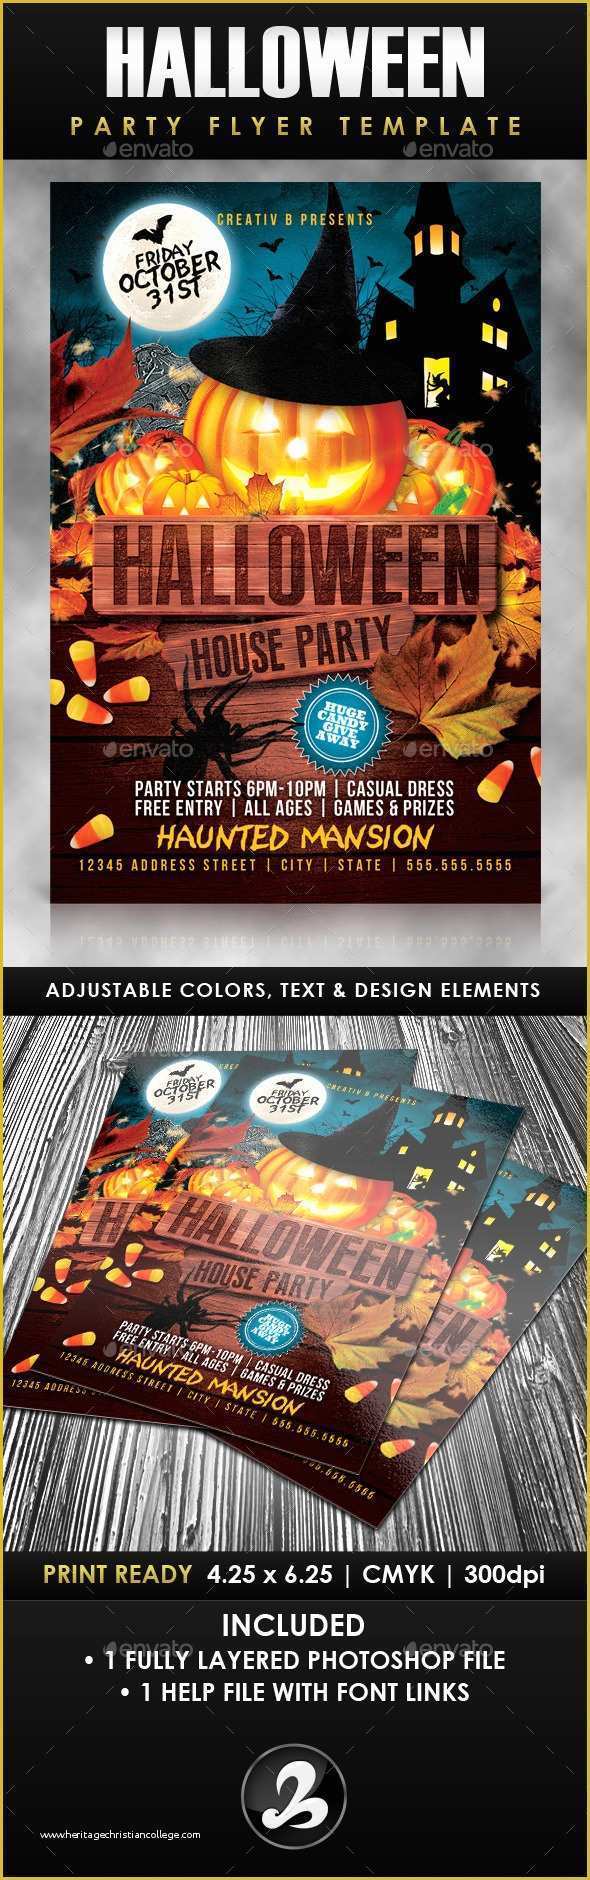 House Party Flyer Template Free Of Halloween House Party Flyer Template events Flyers